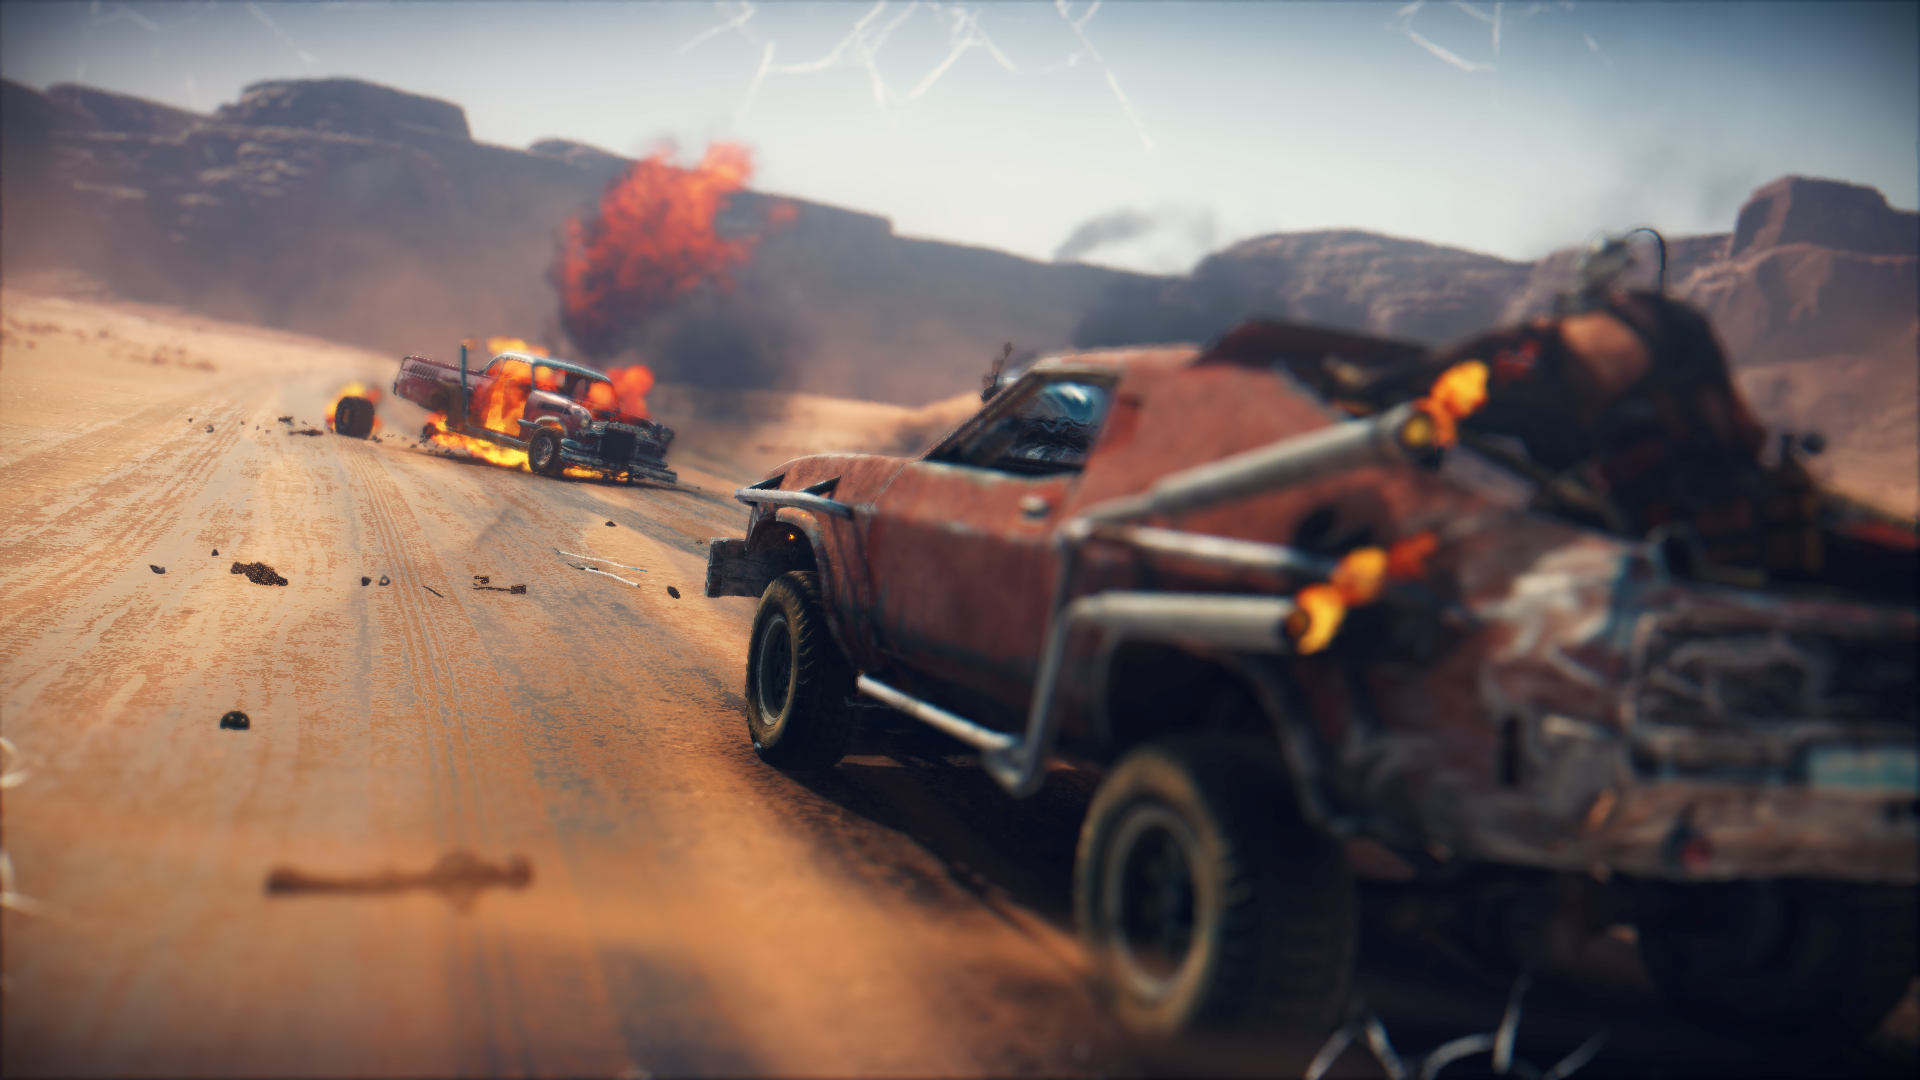 General 1920x1080 Mad Max Mad Max (game) offroad car vehicle explosion post apocalypse exhaust pipes fire video game car desert video game art screen shot CGI road driving video games depth of field sunlight